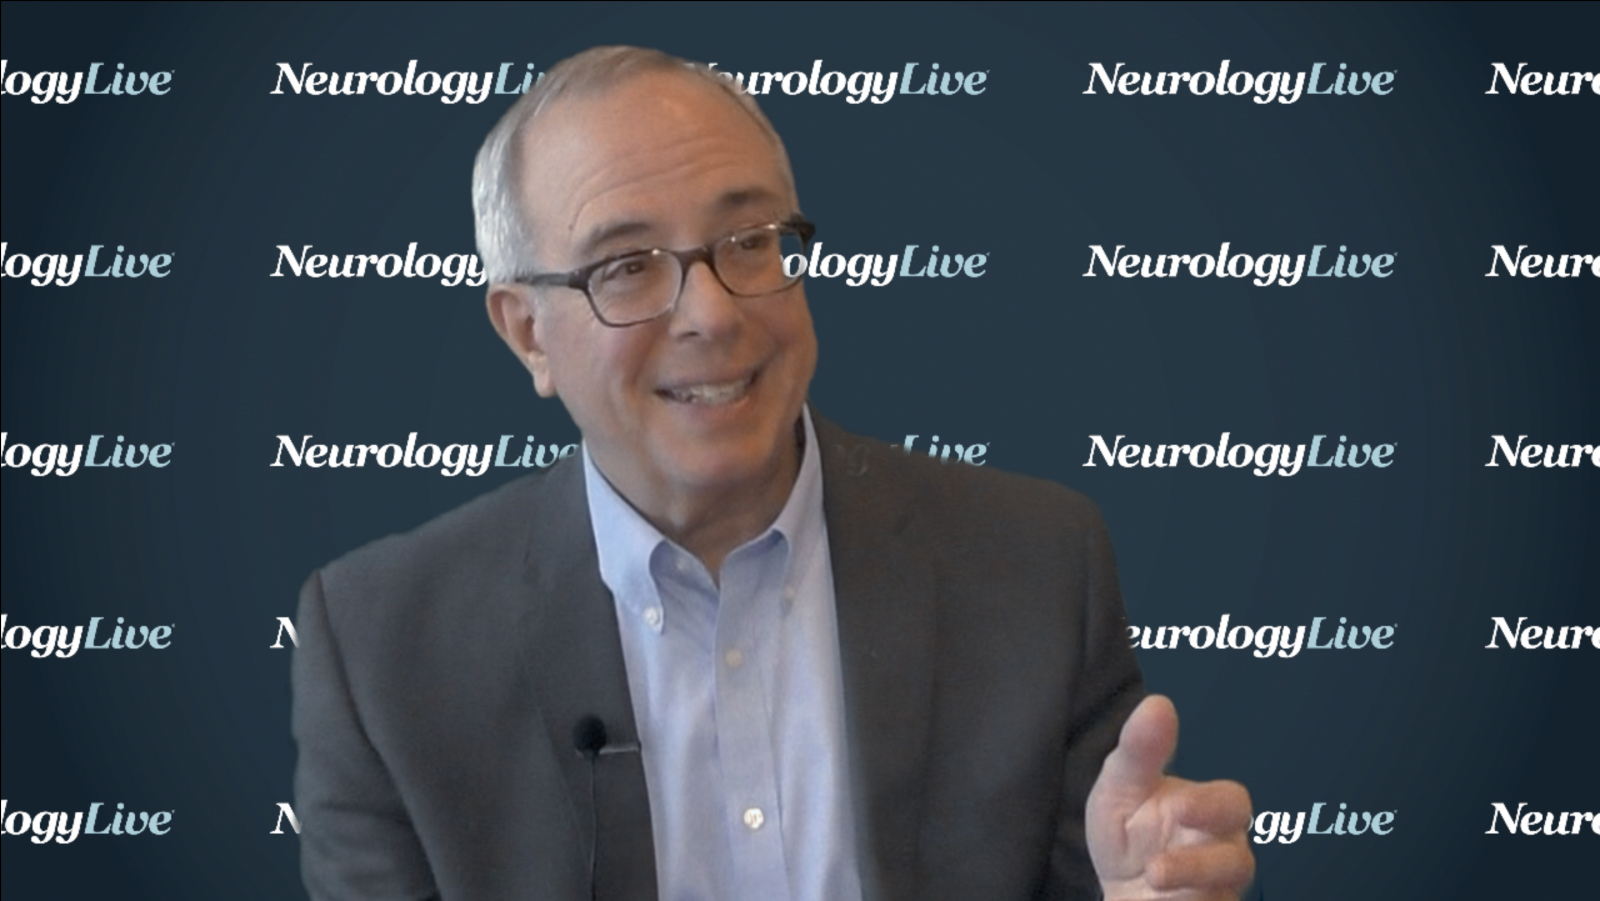 Michael Sperling, MD: Surgical Advancements for Epilepsy